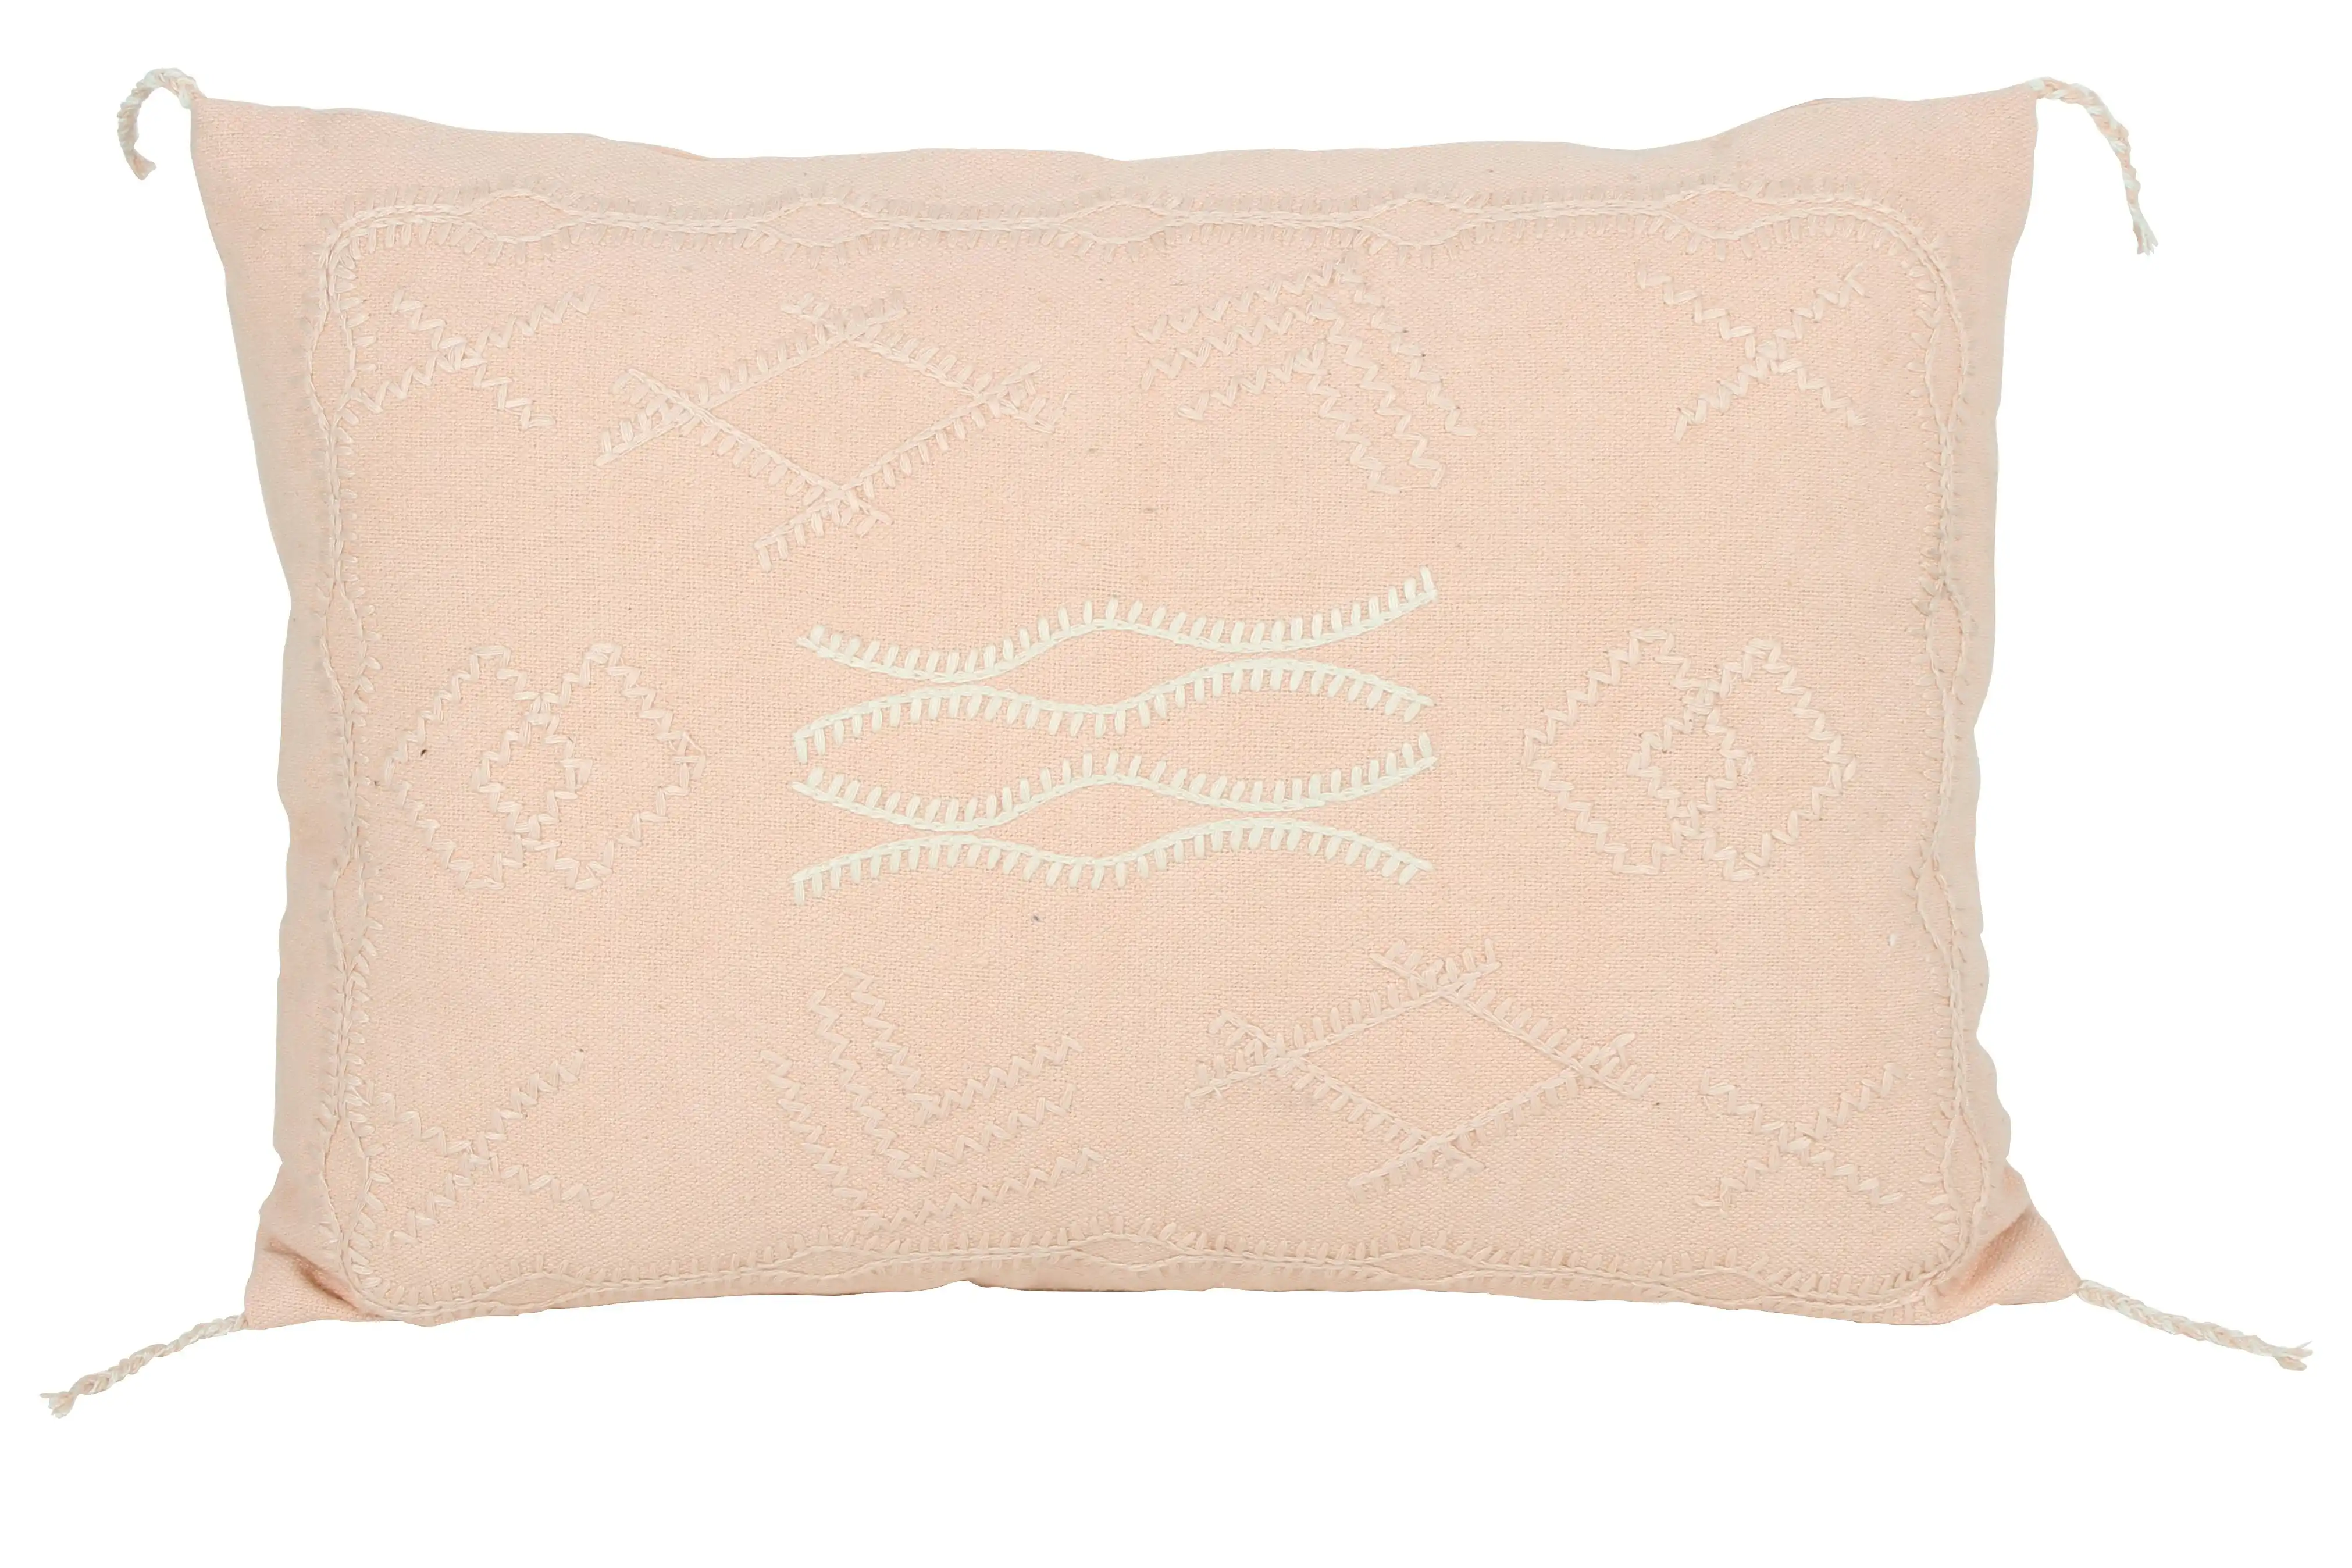 Indra Embroidered Cushion Dusty Pink 50 x 35cm